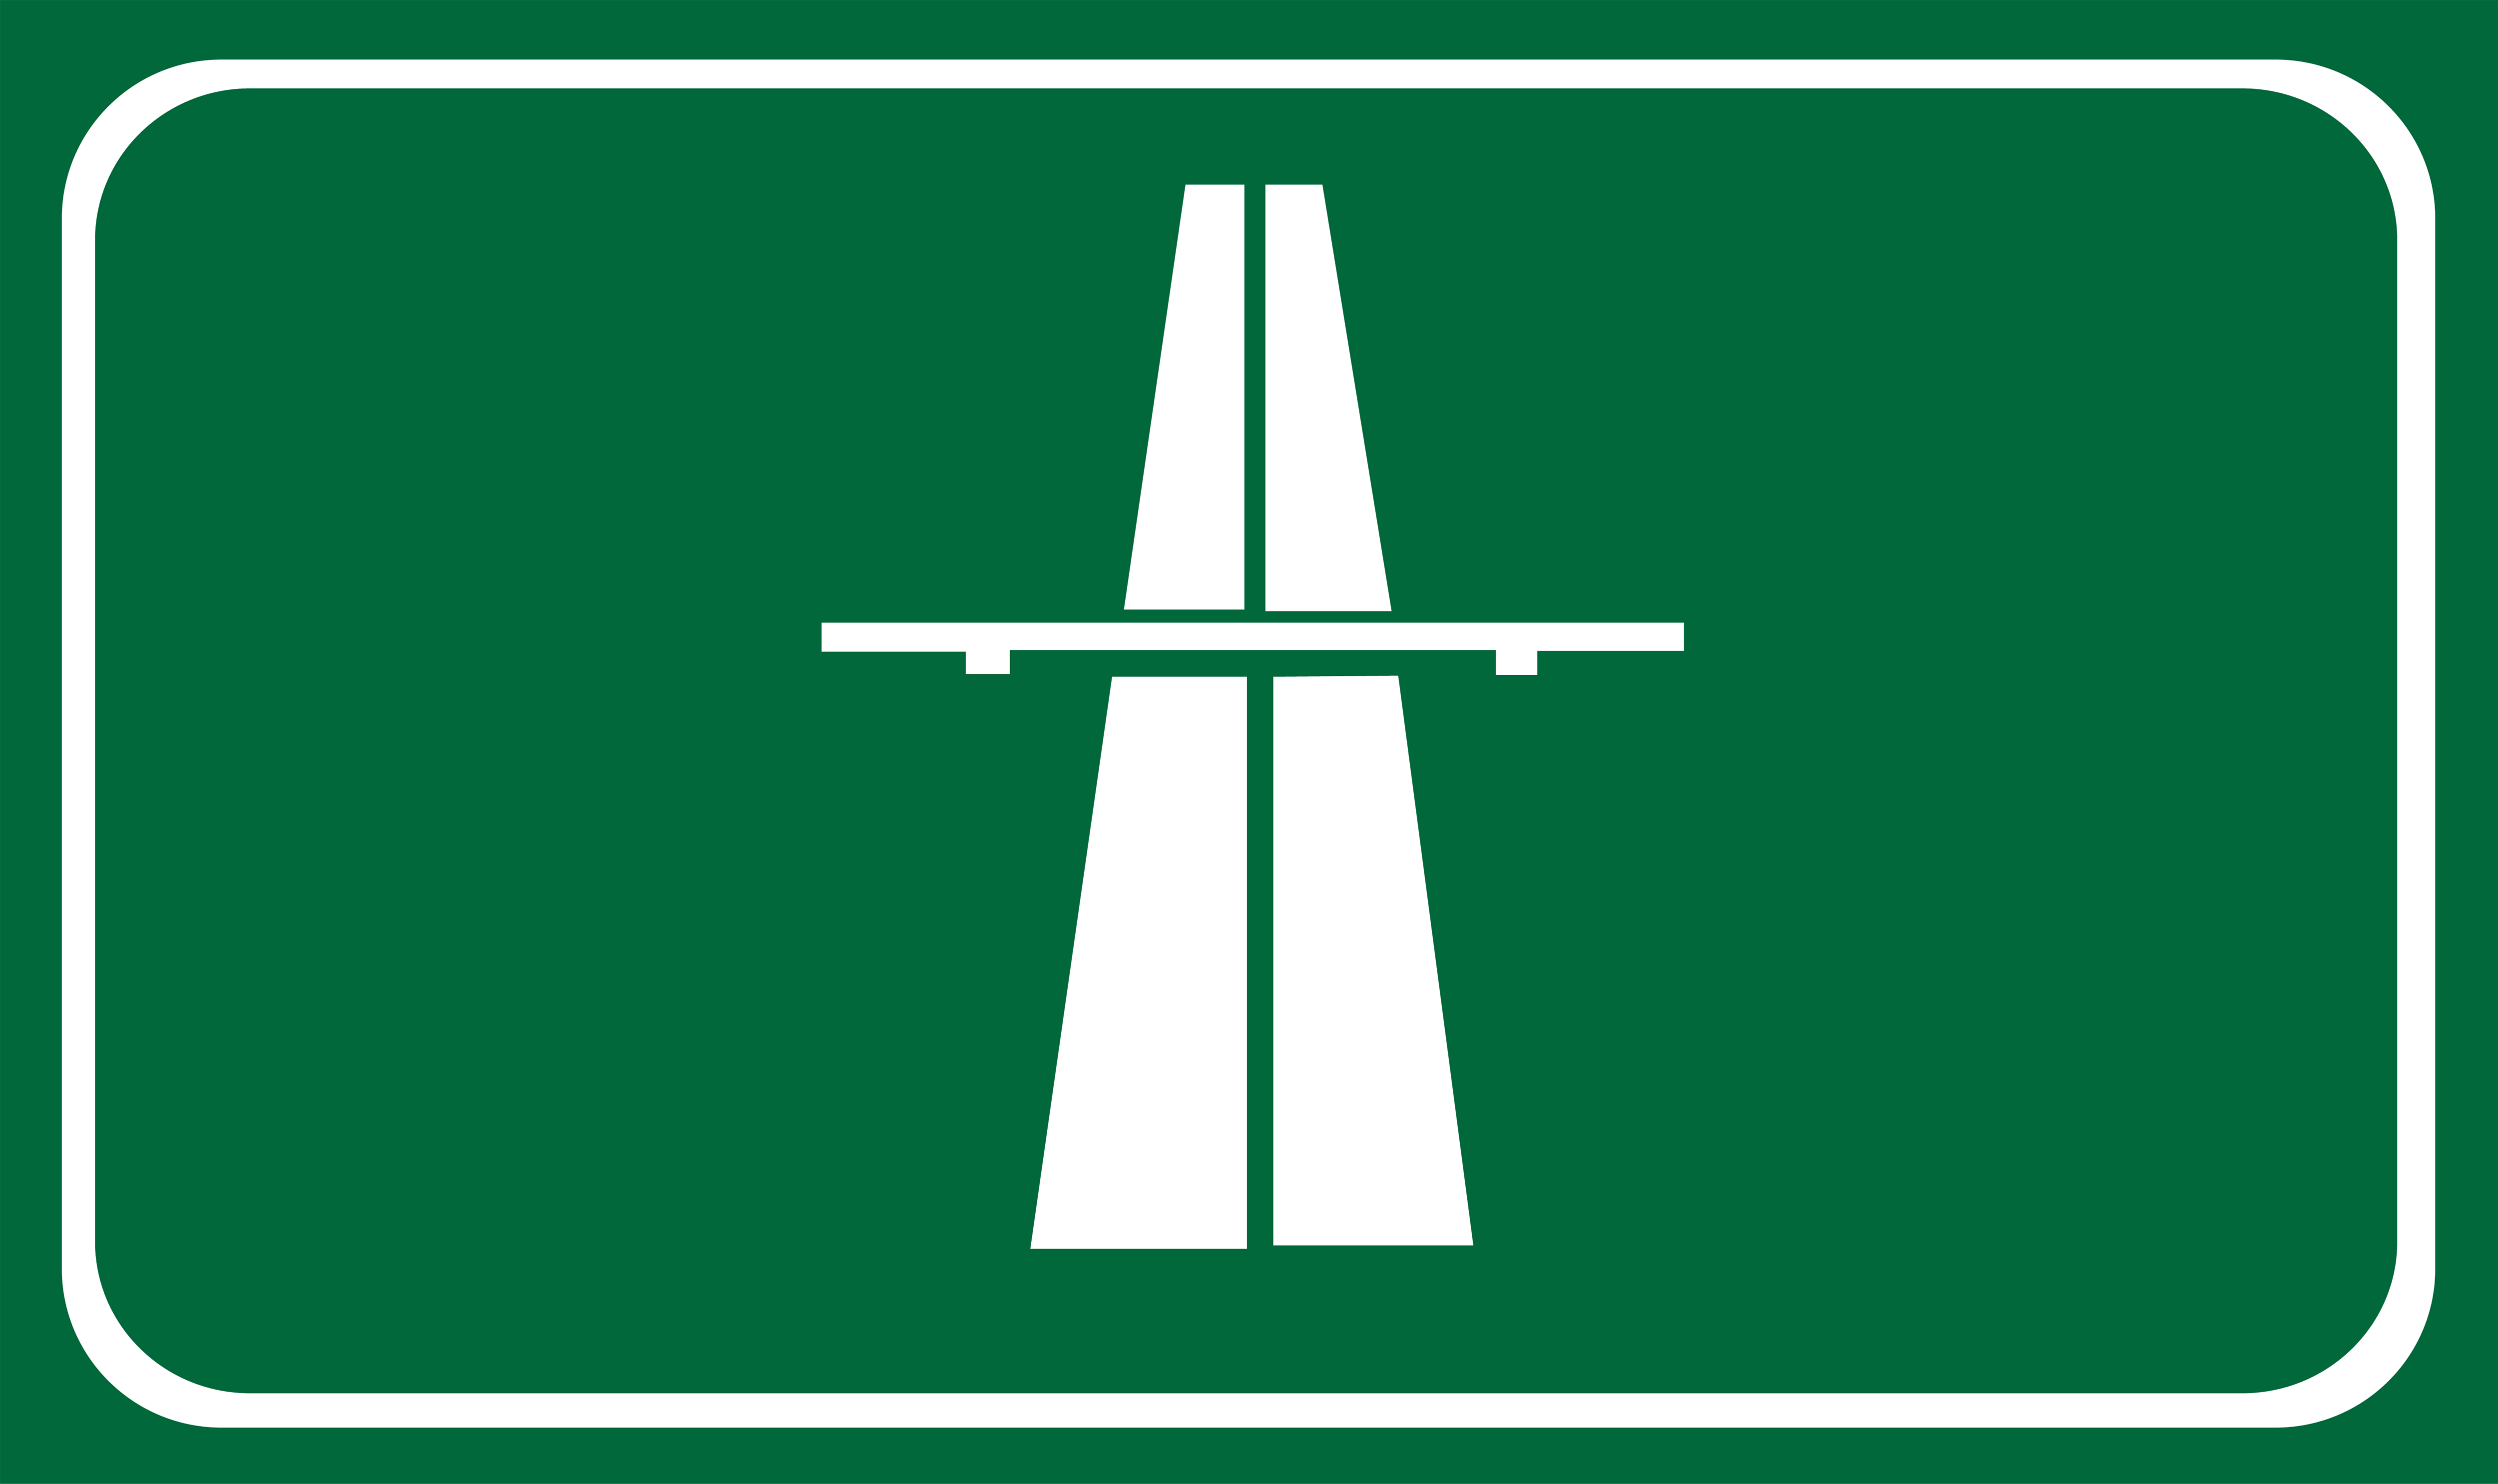 green highway road sign